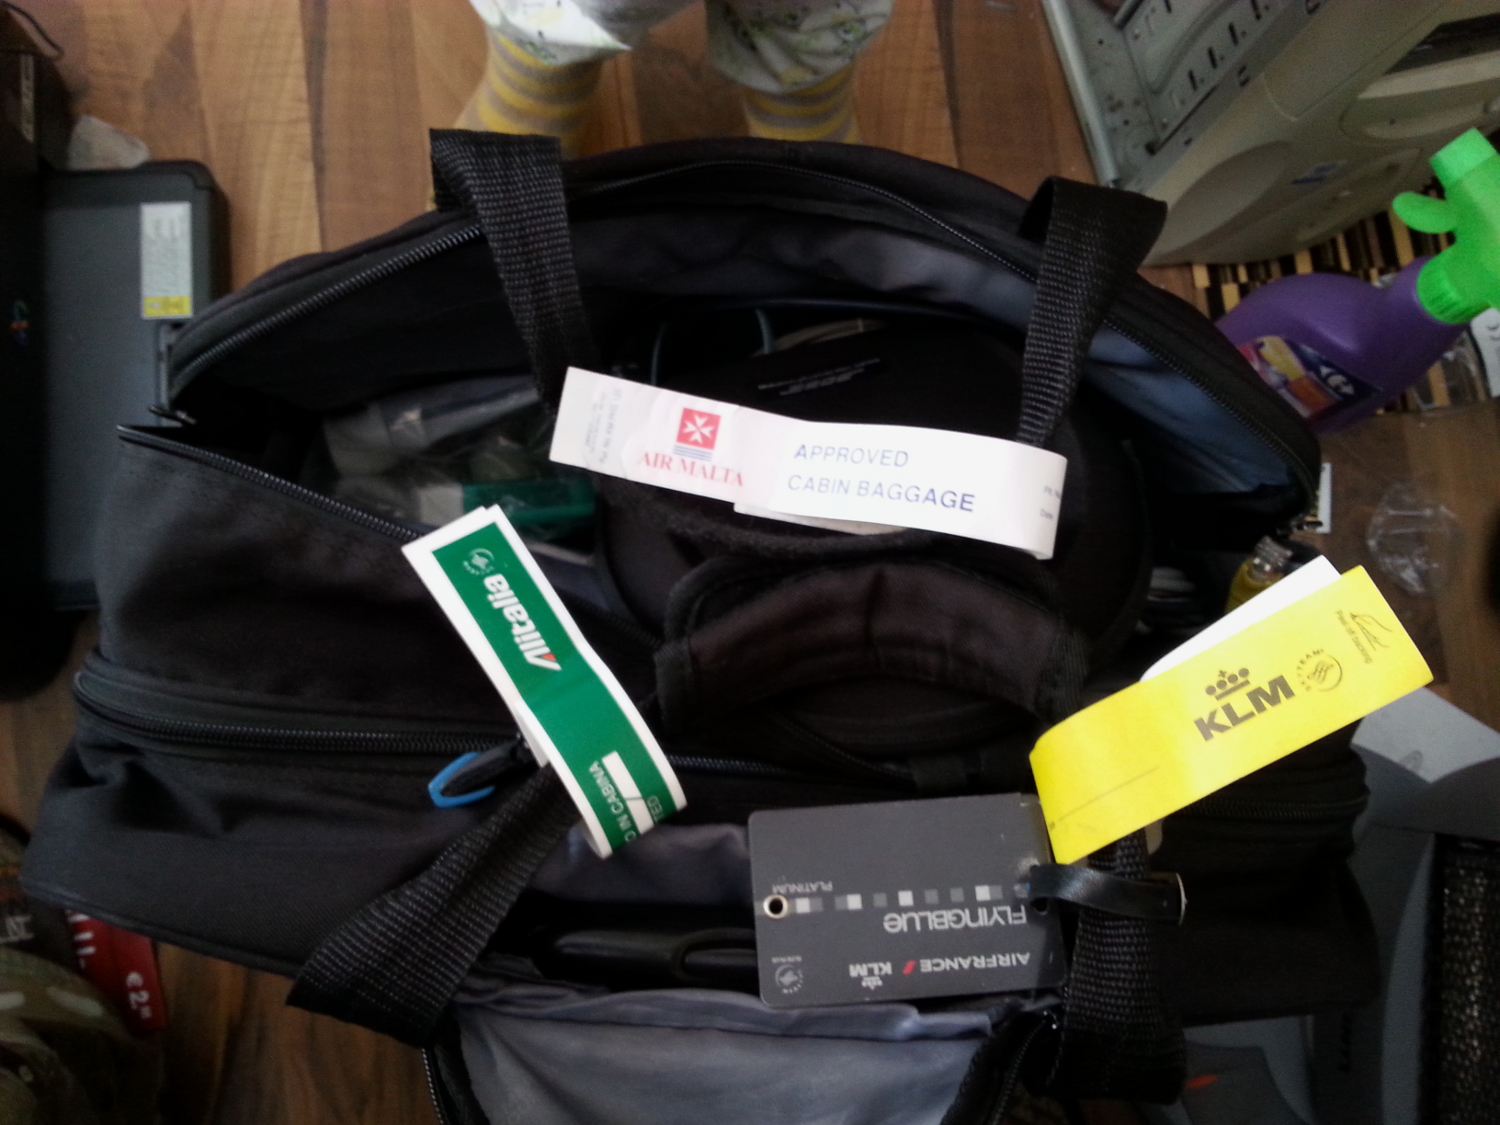 A frequent flyer's bag